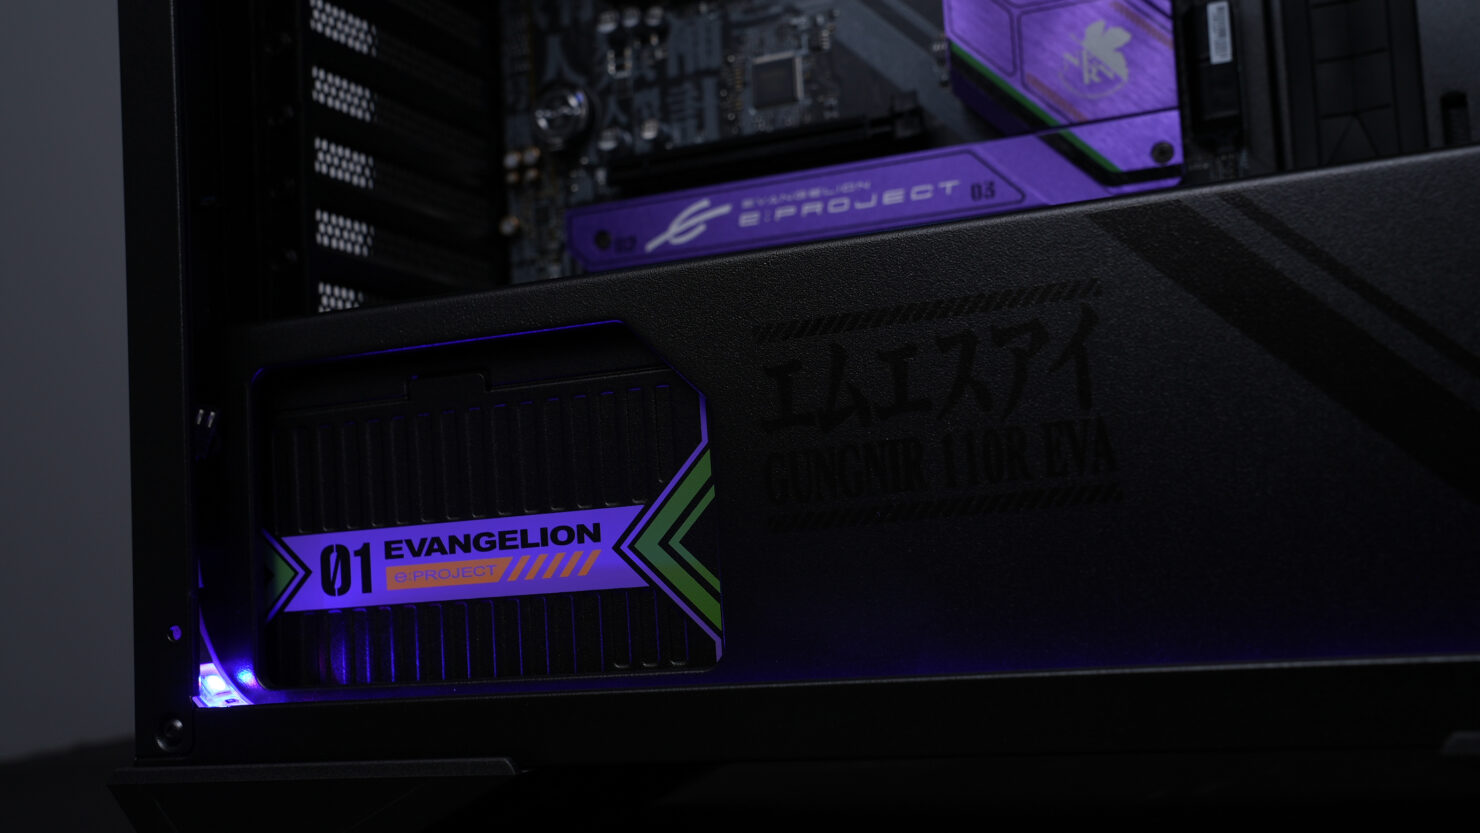 msi-unveils-neon-genesis-evangelion-anime-inspired-pc-components-cases-motherboards-psus-aio-coolers-_4